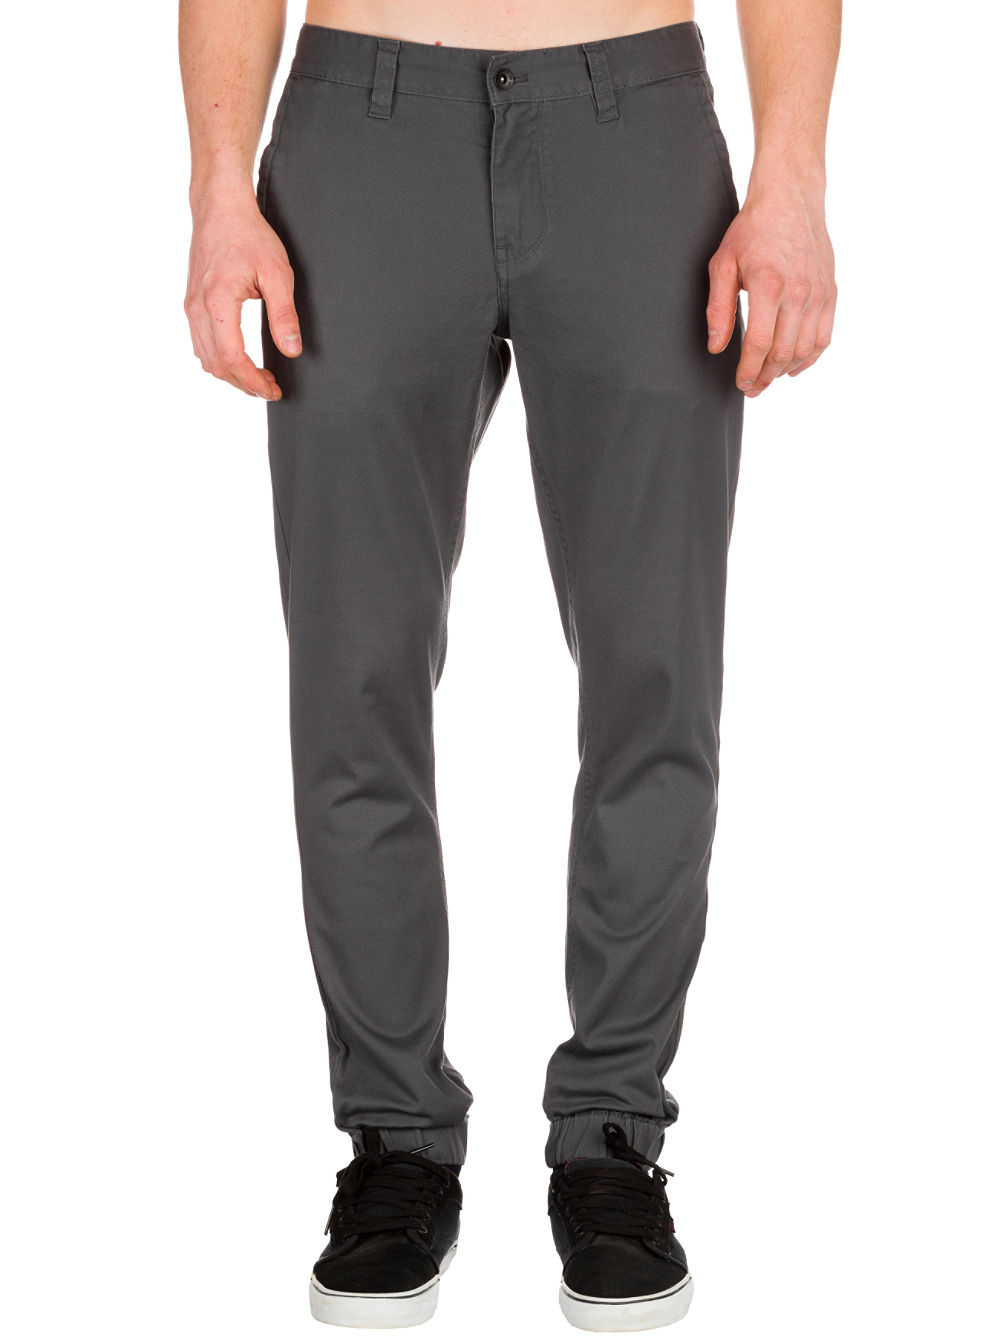 Buy Empyre Jag Pants online at blue-tomato.com